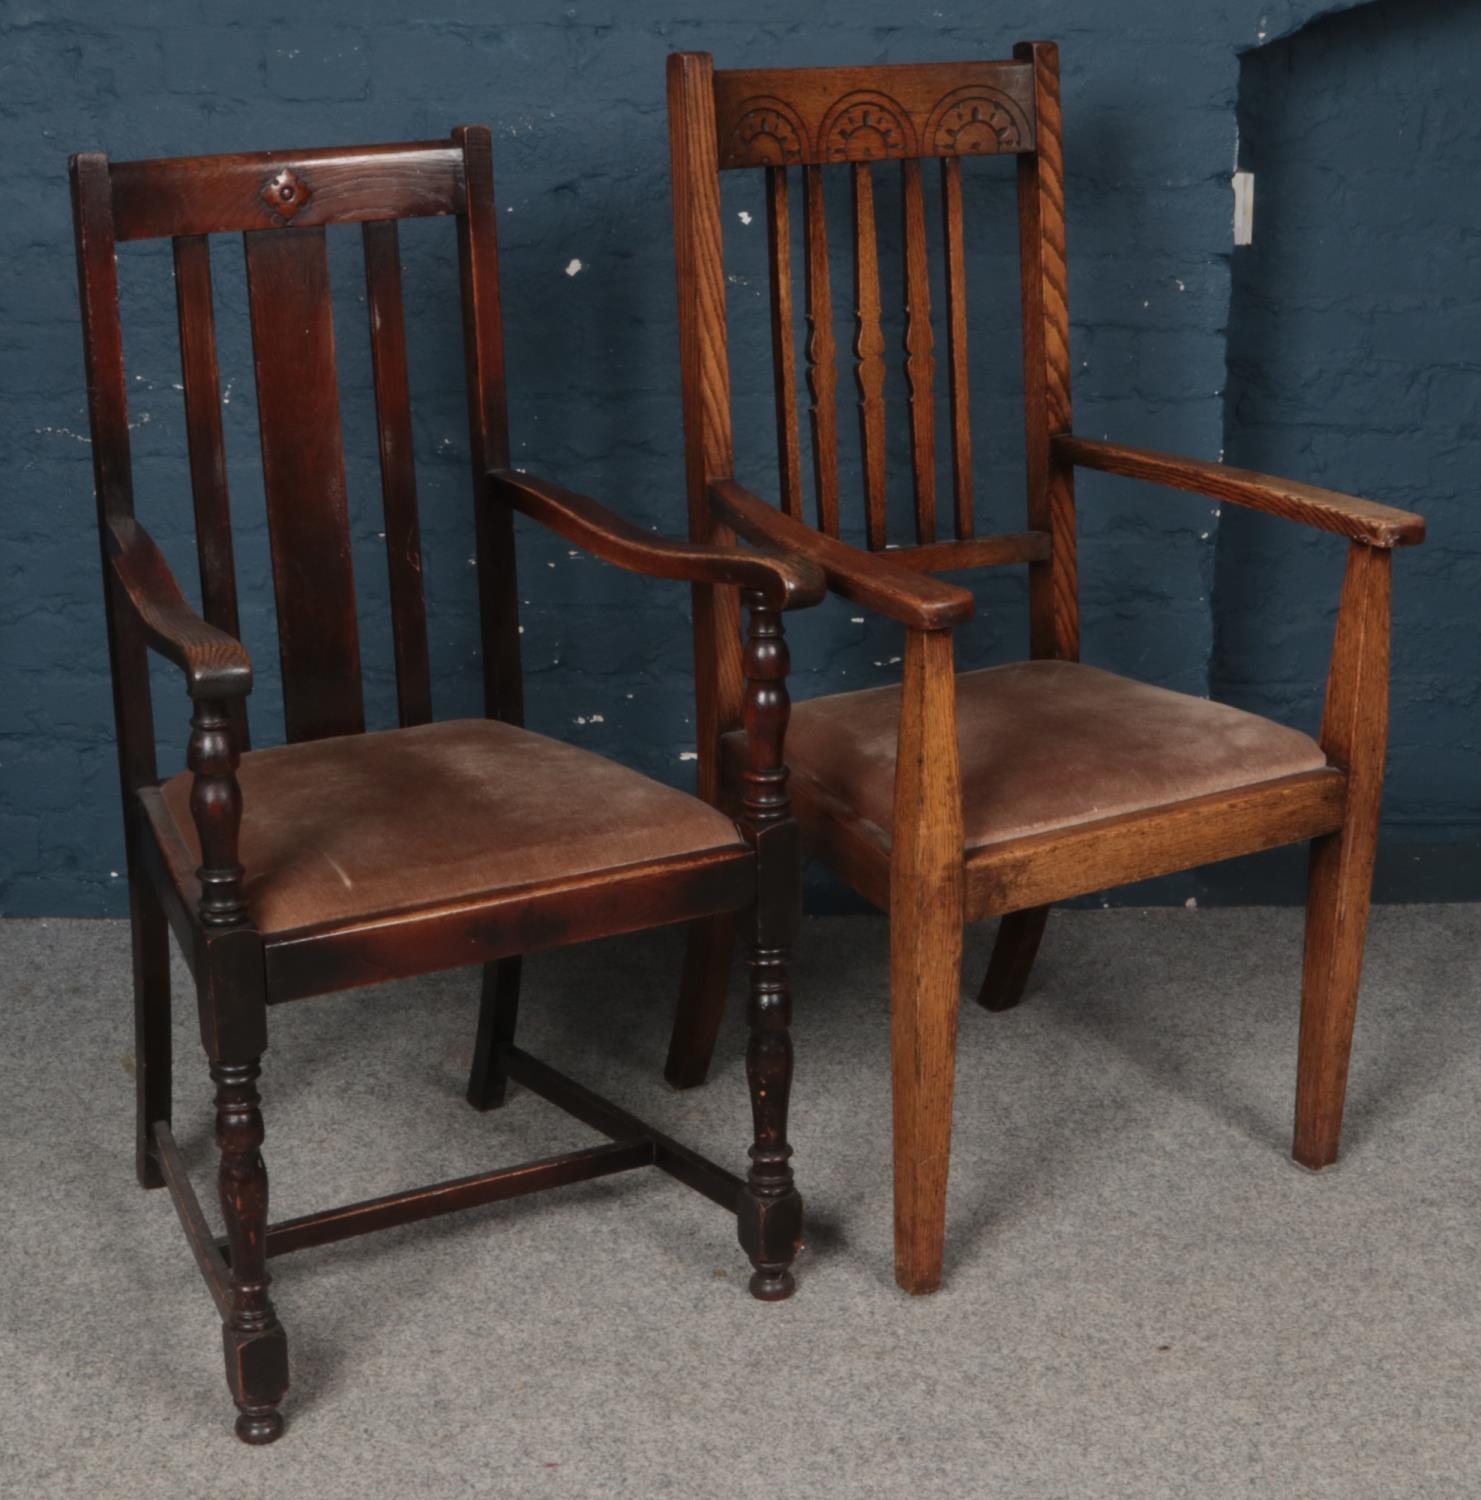 Two Carved Oak Armchairs with Fabric Upholstery.